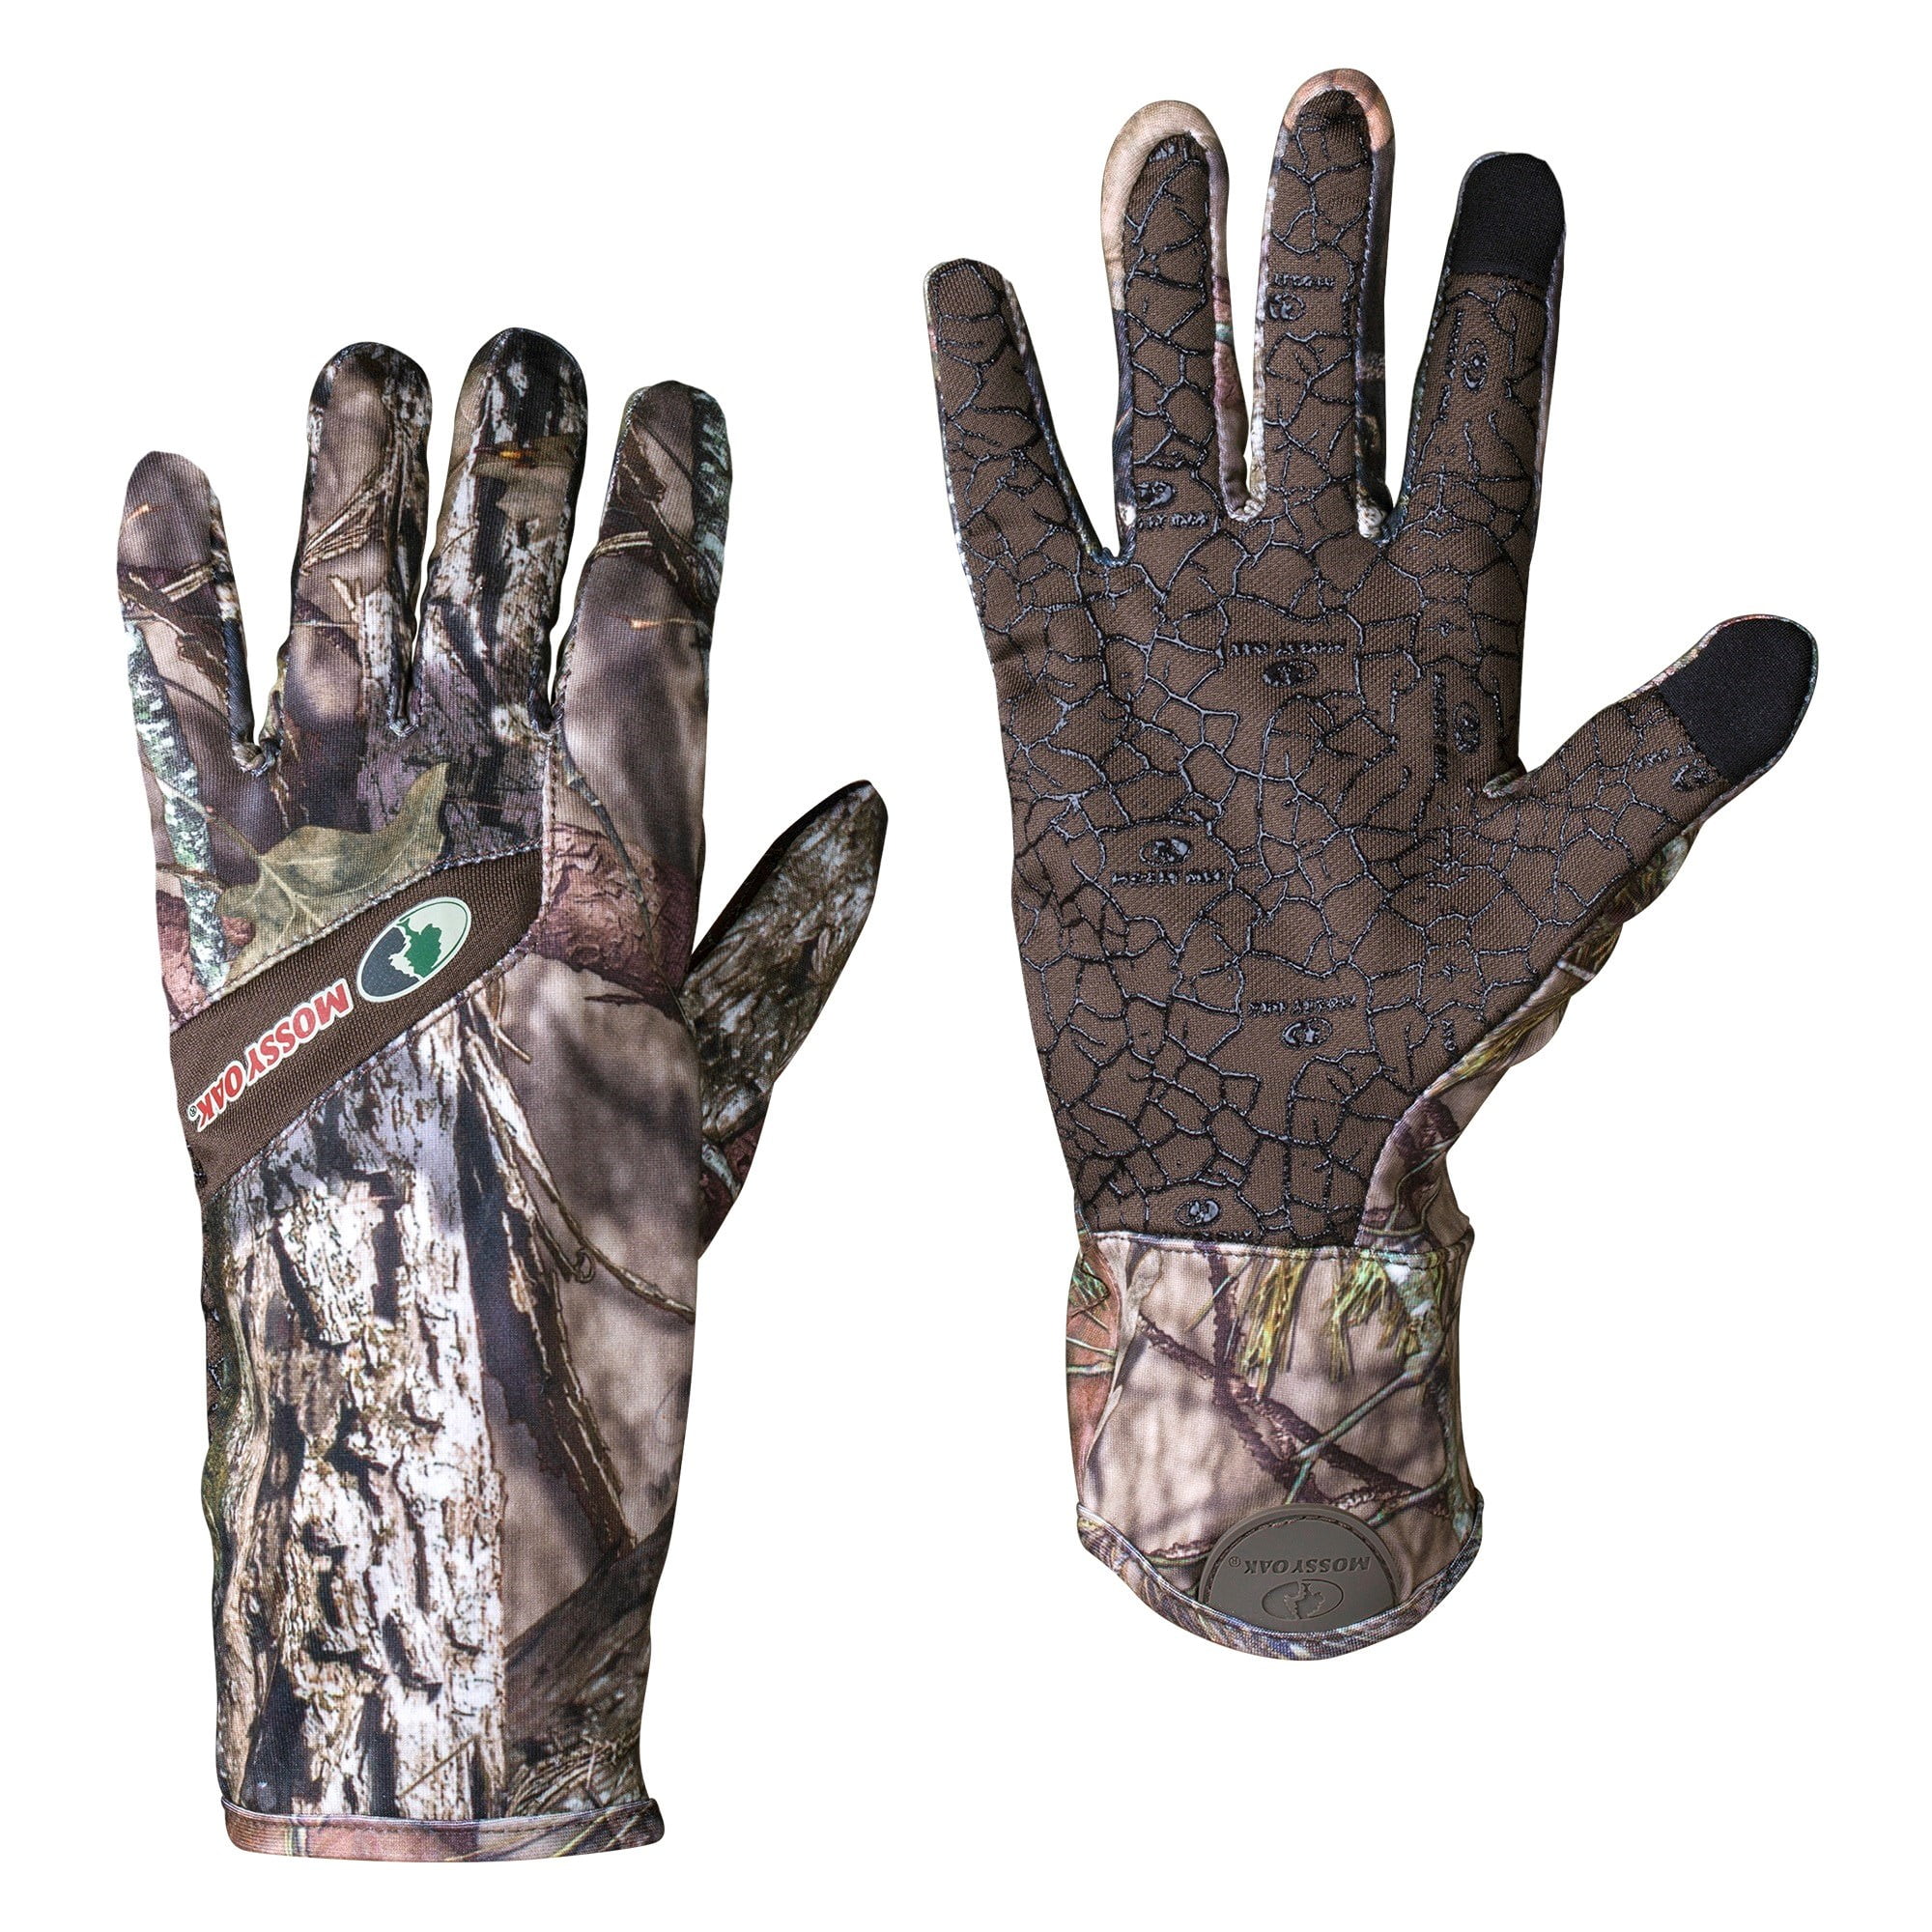 NEW Mens Mossy Oak Break-Up Country Camouflage Hunting Gloves Non-Slip One Size 